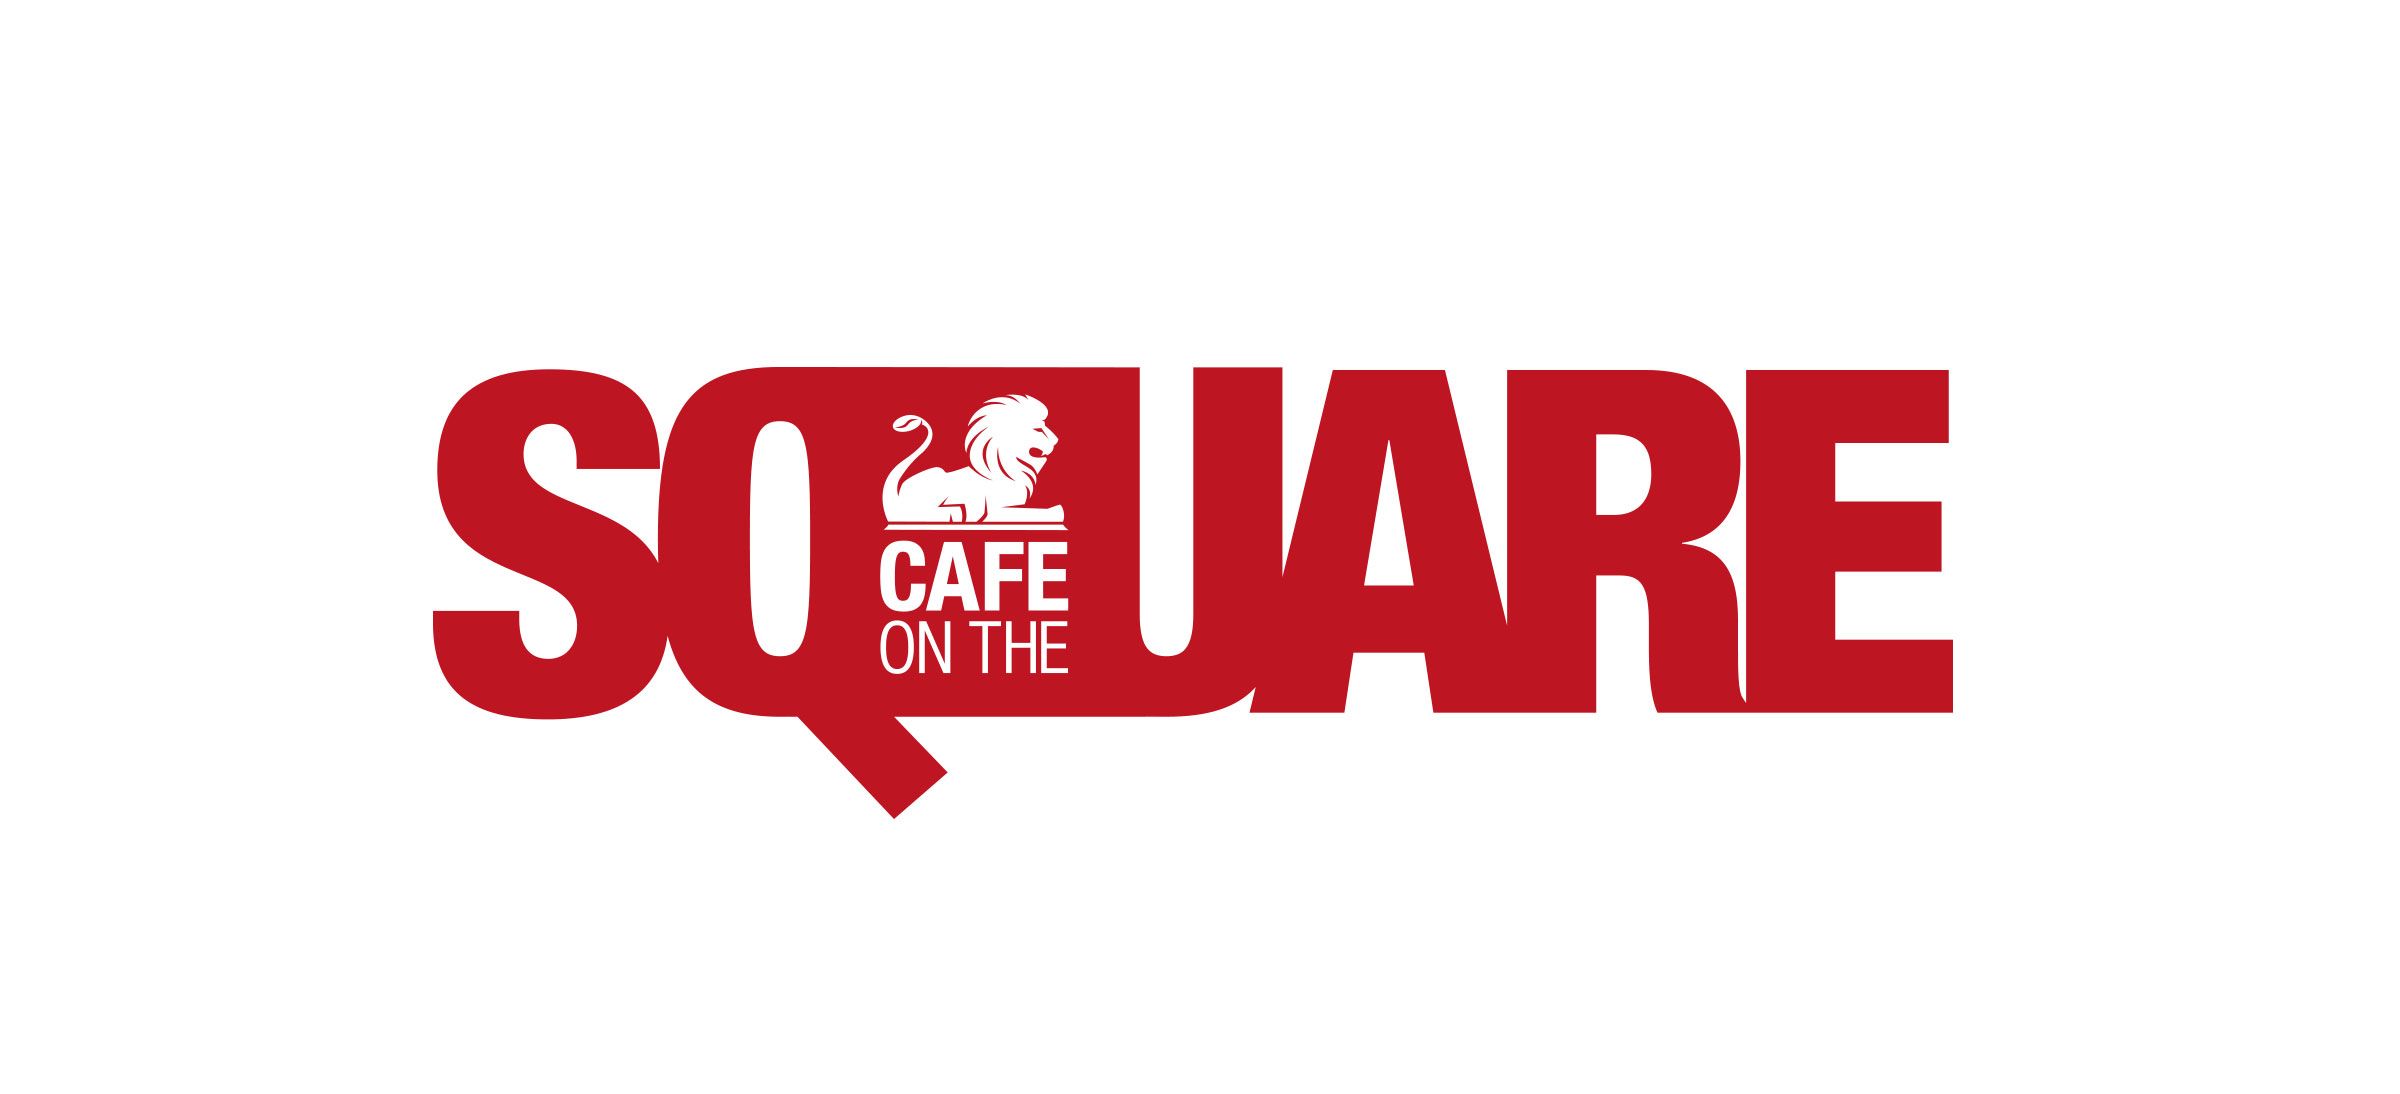 Cafe On The Square